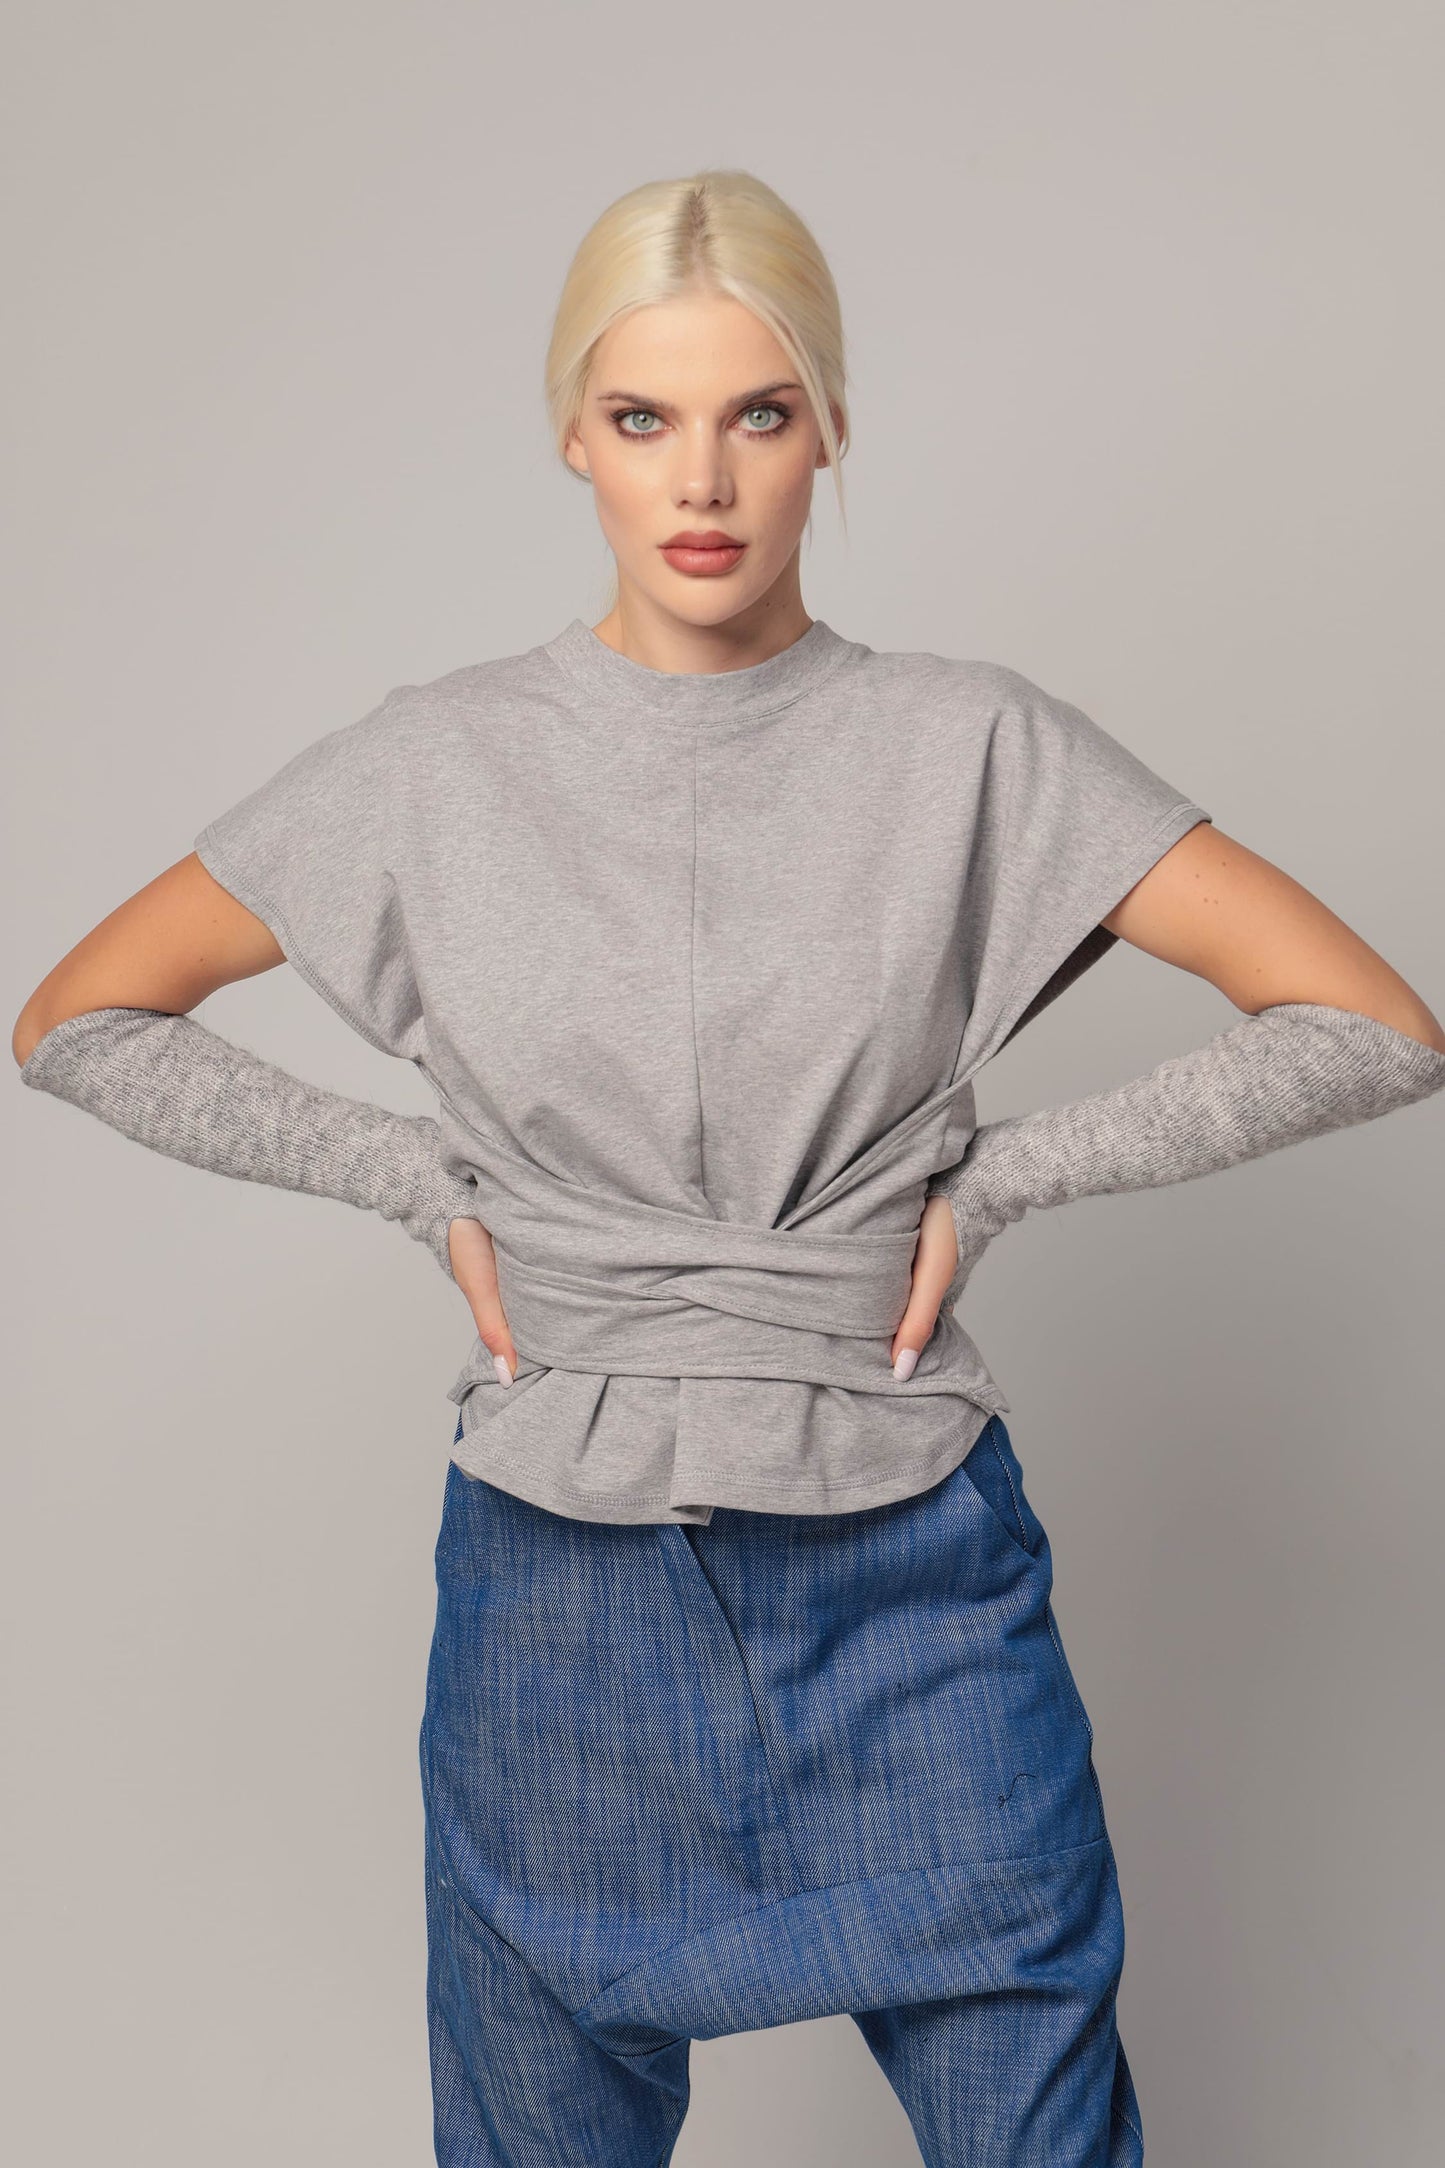 SEINA - Short sleeved sweatshirt blouse with front knot detail